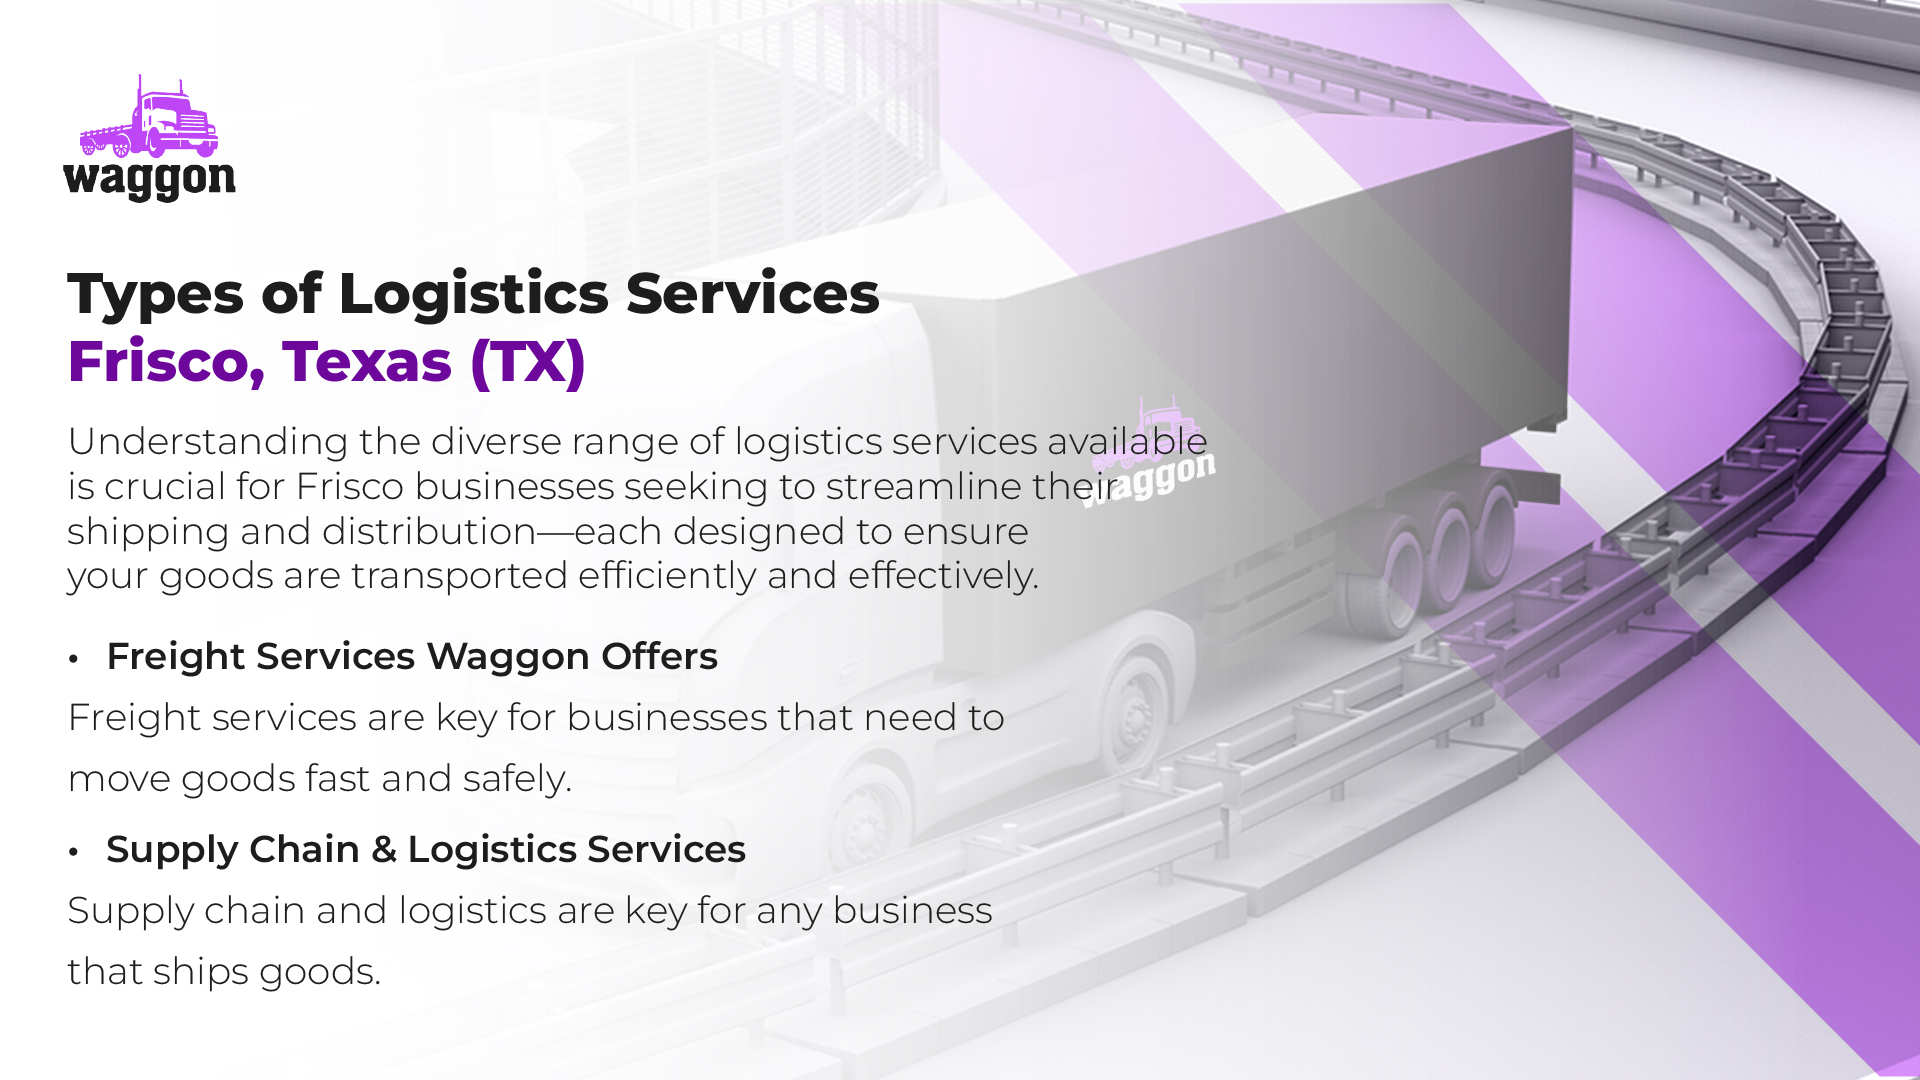 Types of Logistics Services in Frisco, Texas (TX)